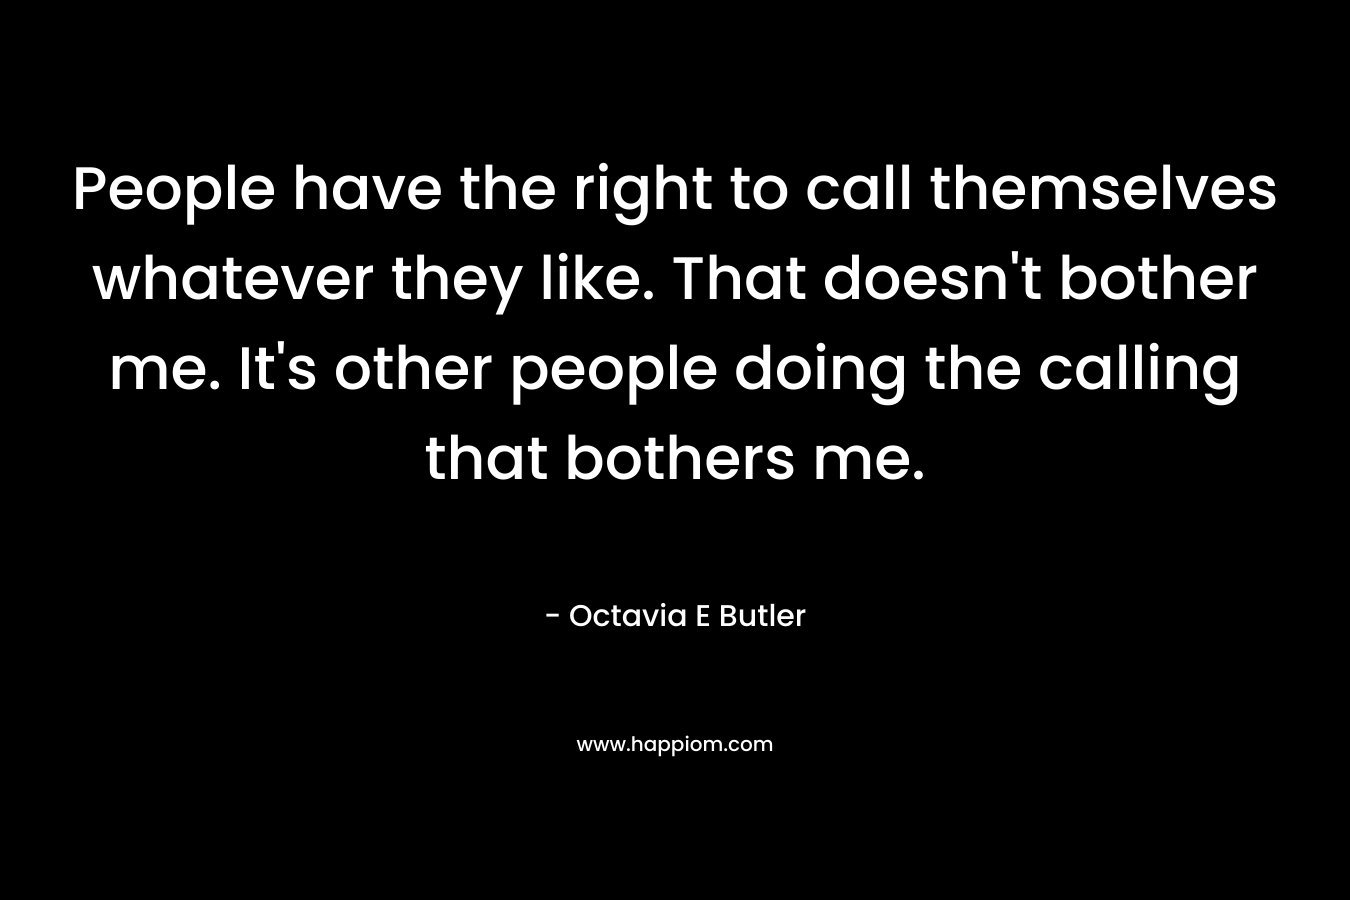 People have the right to call themselves whatever they like. That doesn’t bother me. It’s other people doing the calling that bothers me. – Octavia E Butler